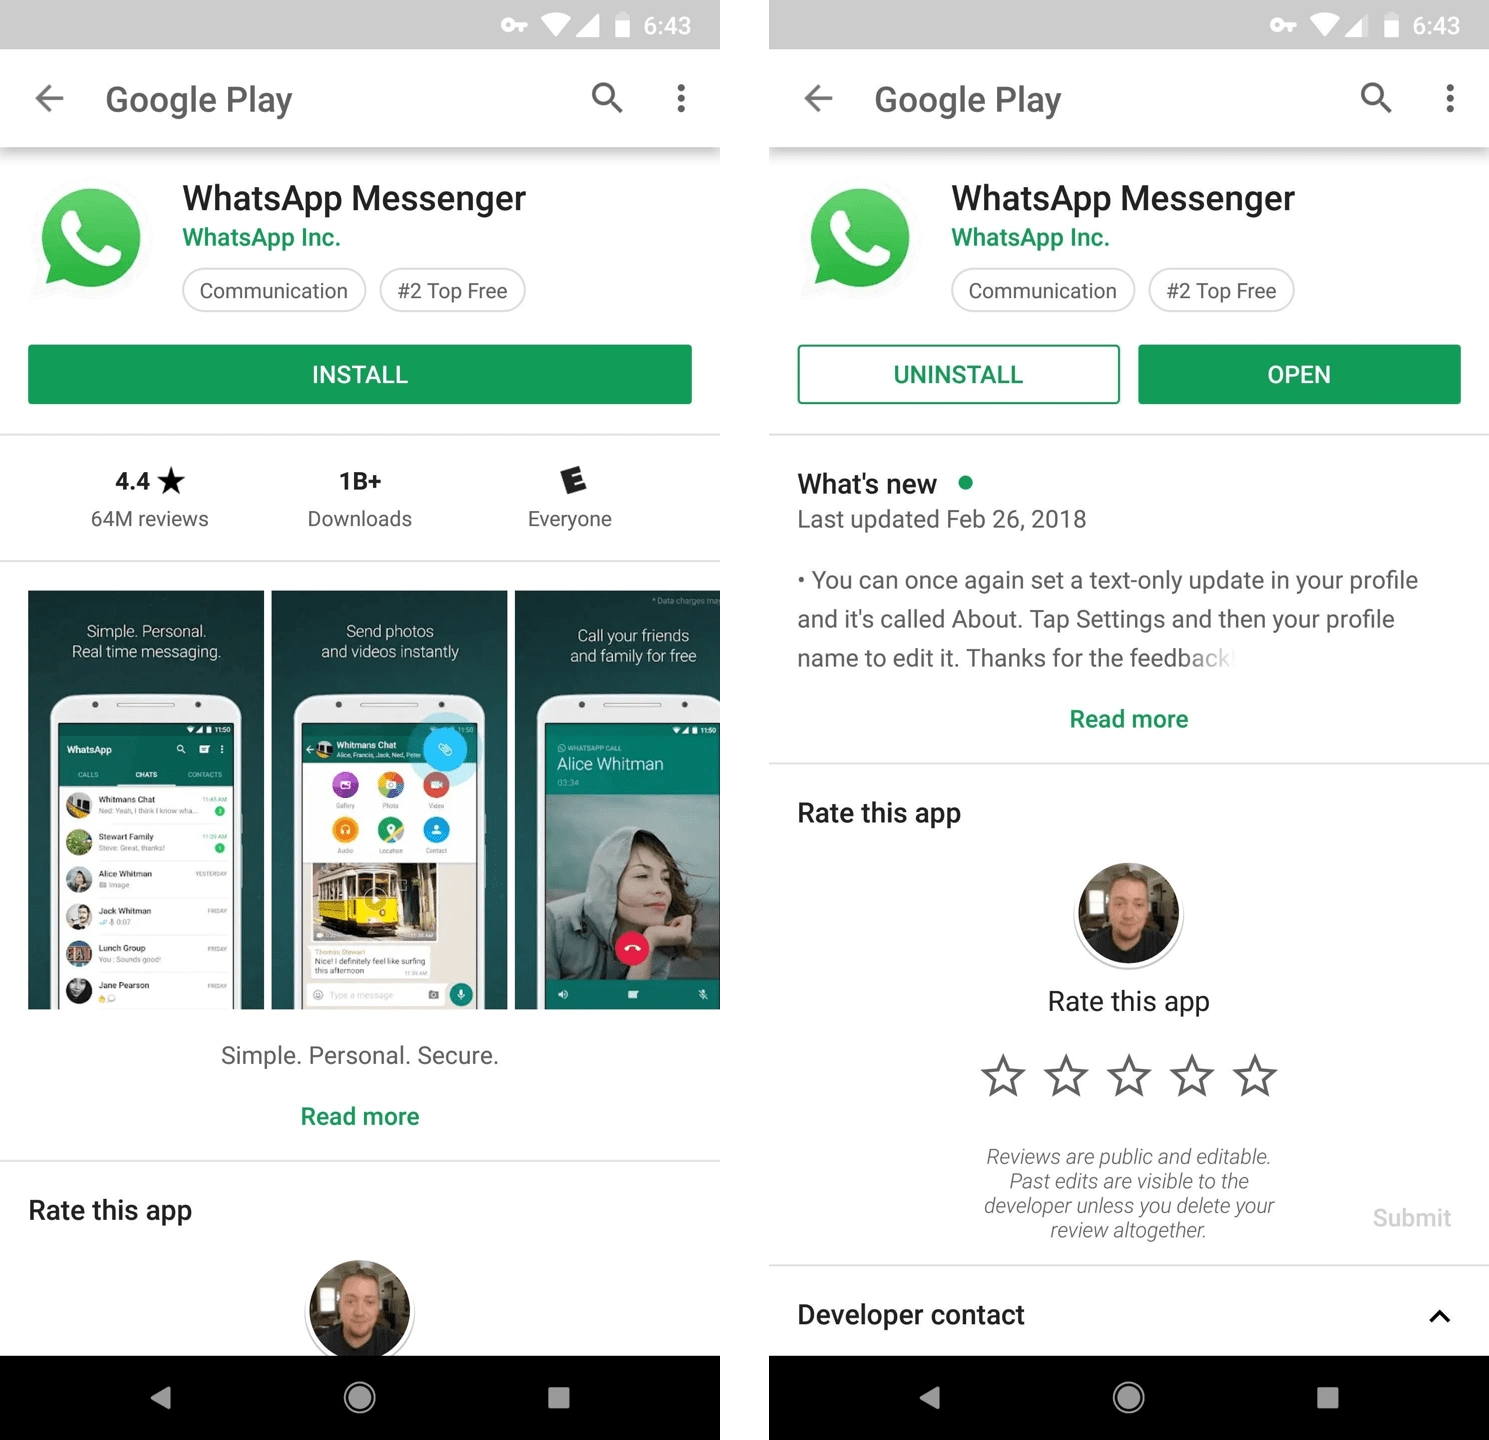 Play Store page before and after installing the page (Source GadgetHacks) WHATSAPP-min